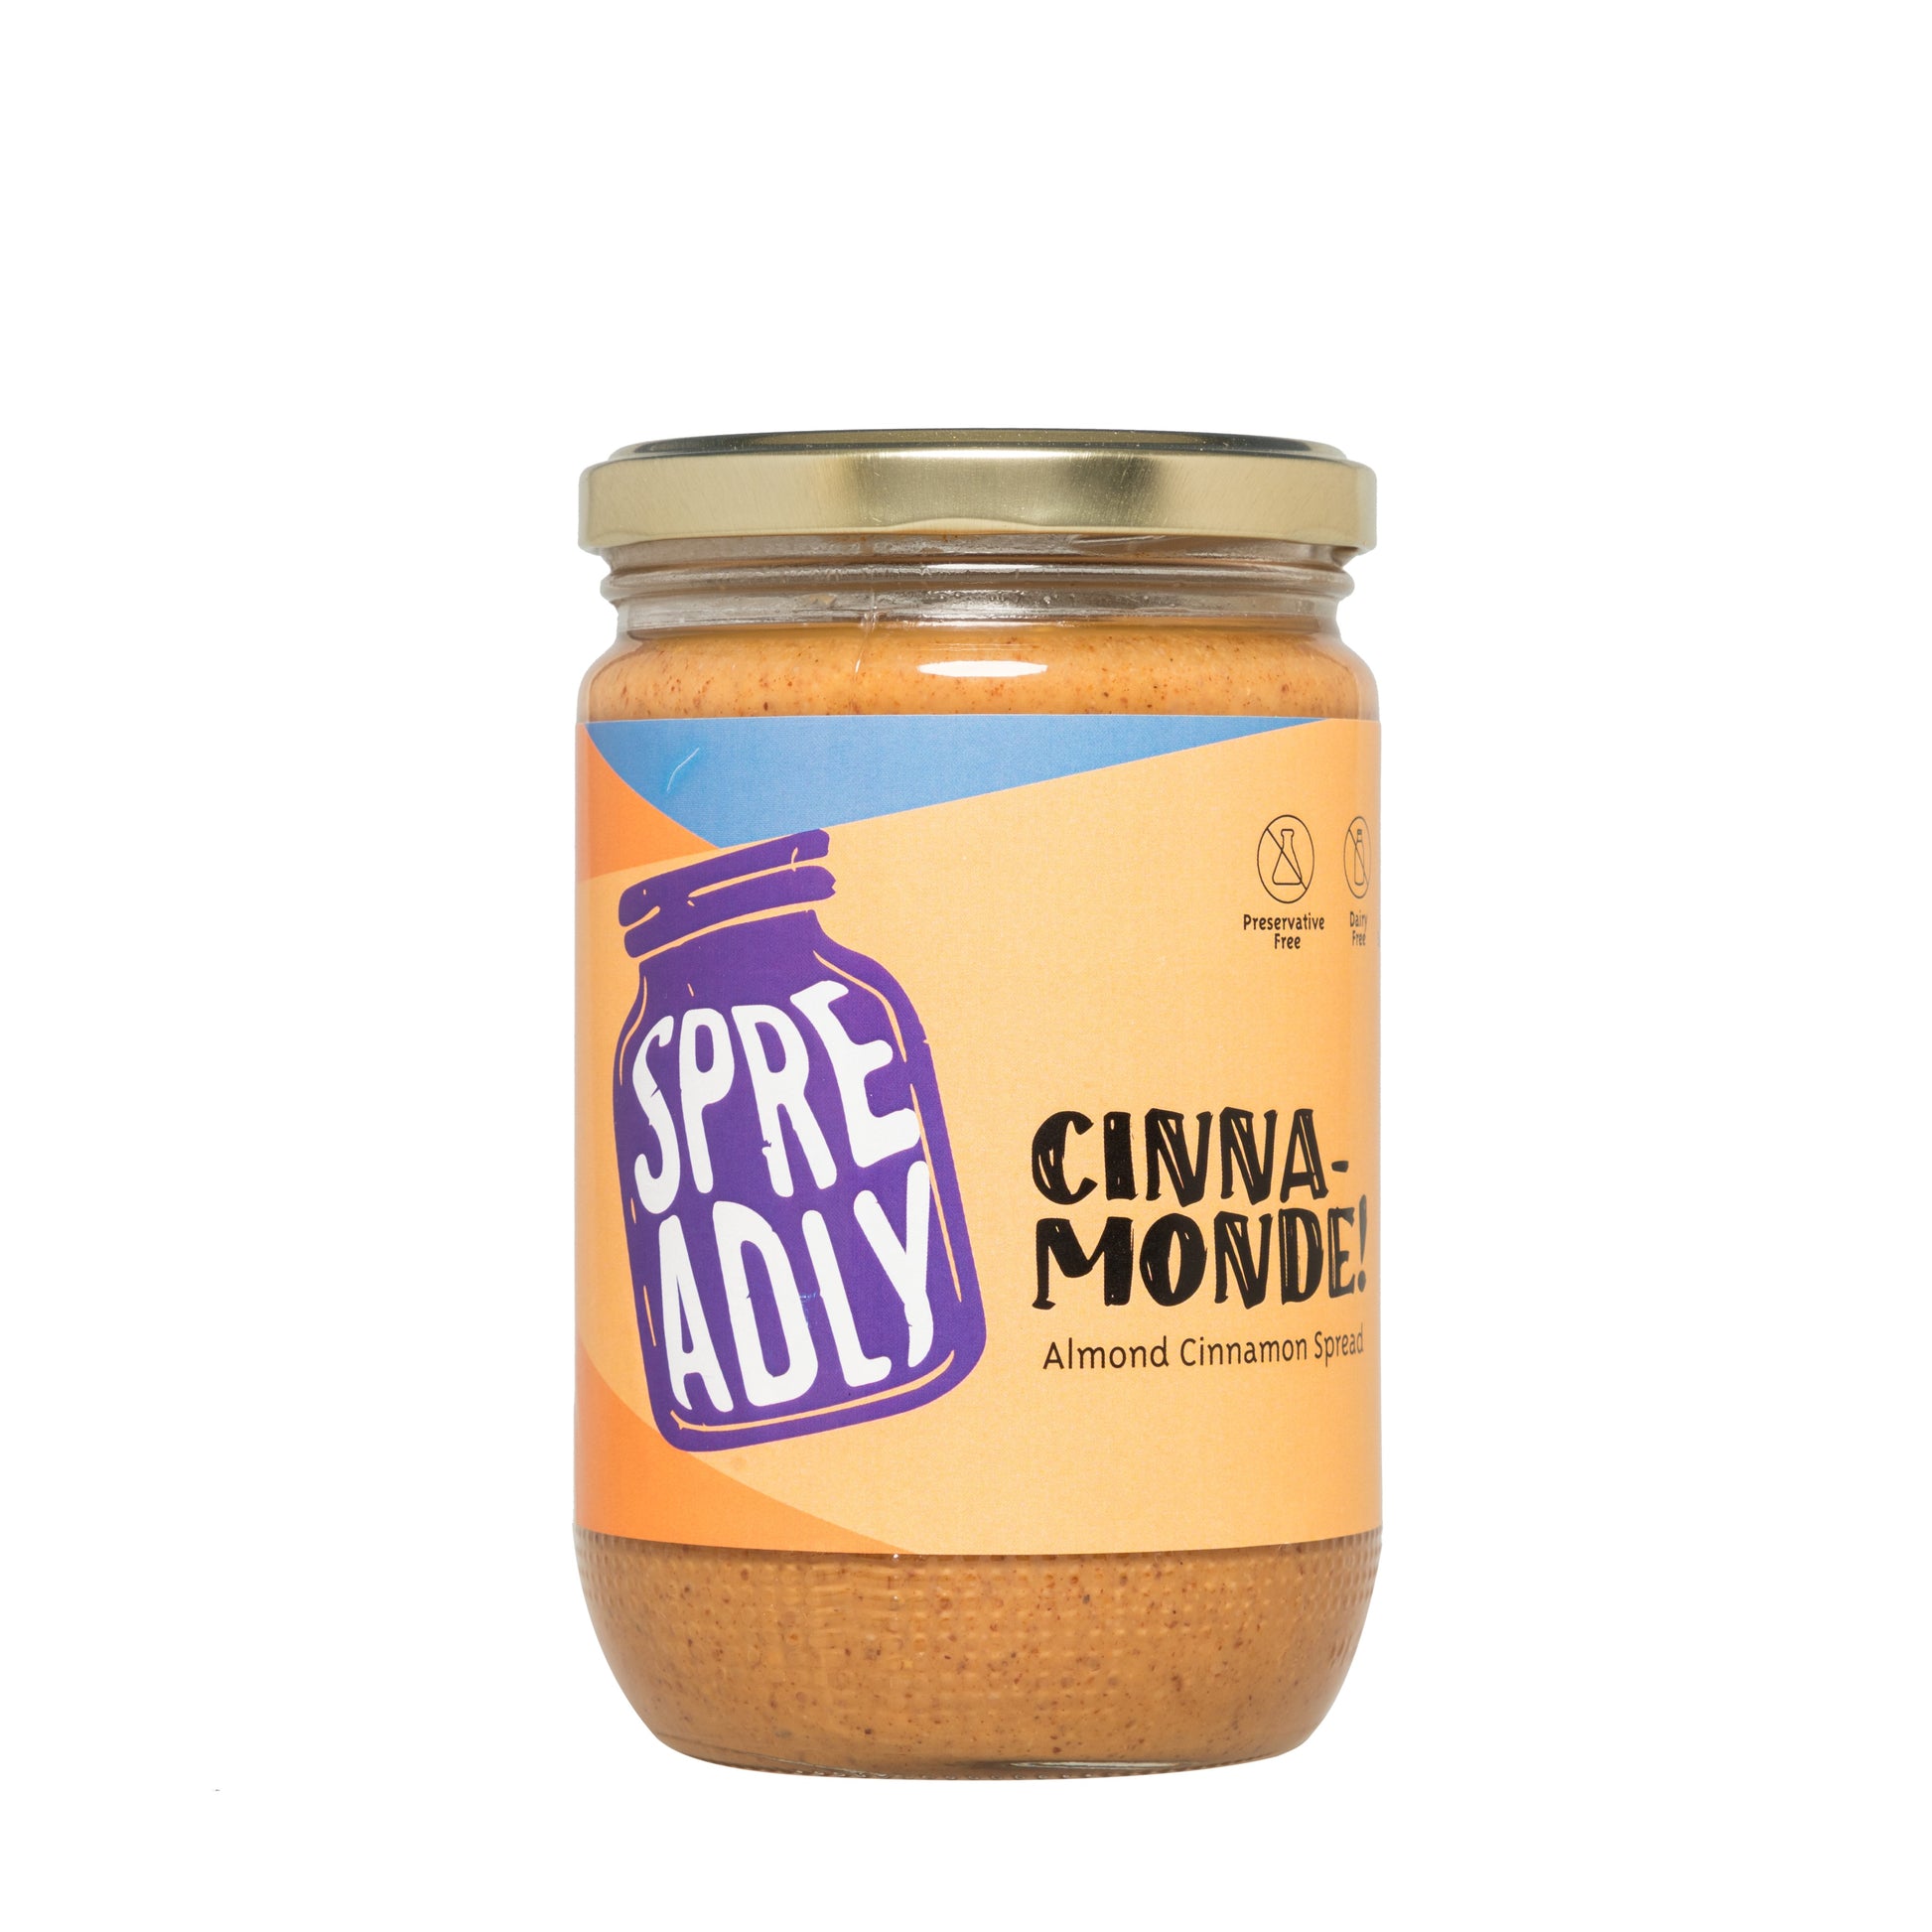 Natural Almond Cinnamon Spread Made of Natural Ingredients, Free of Preservatives and Sweetened with Honey